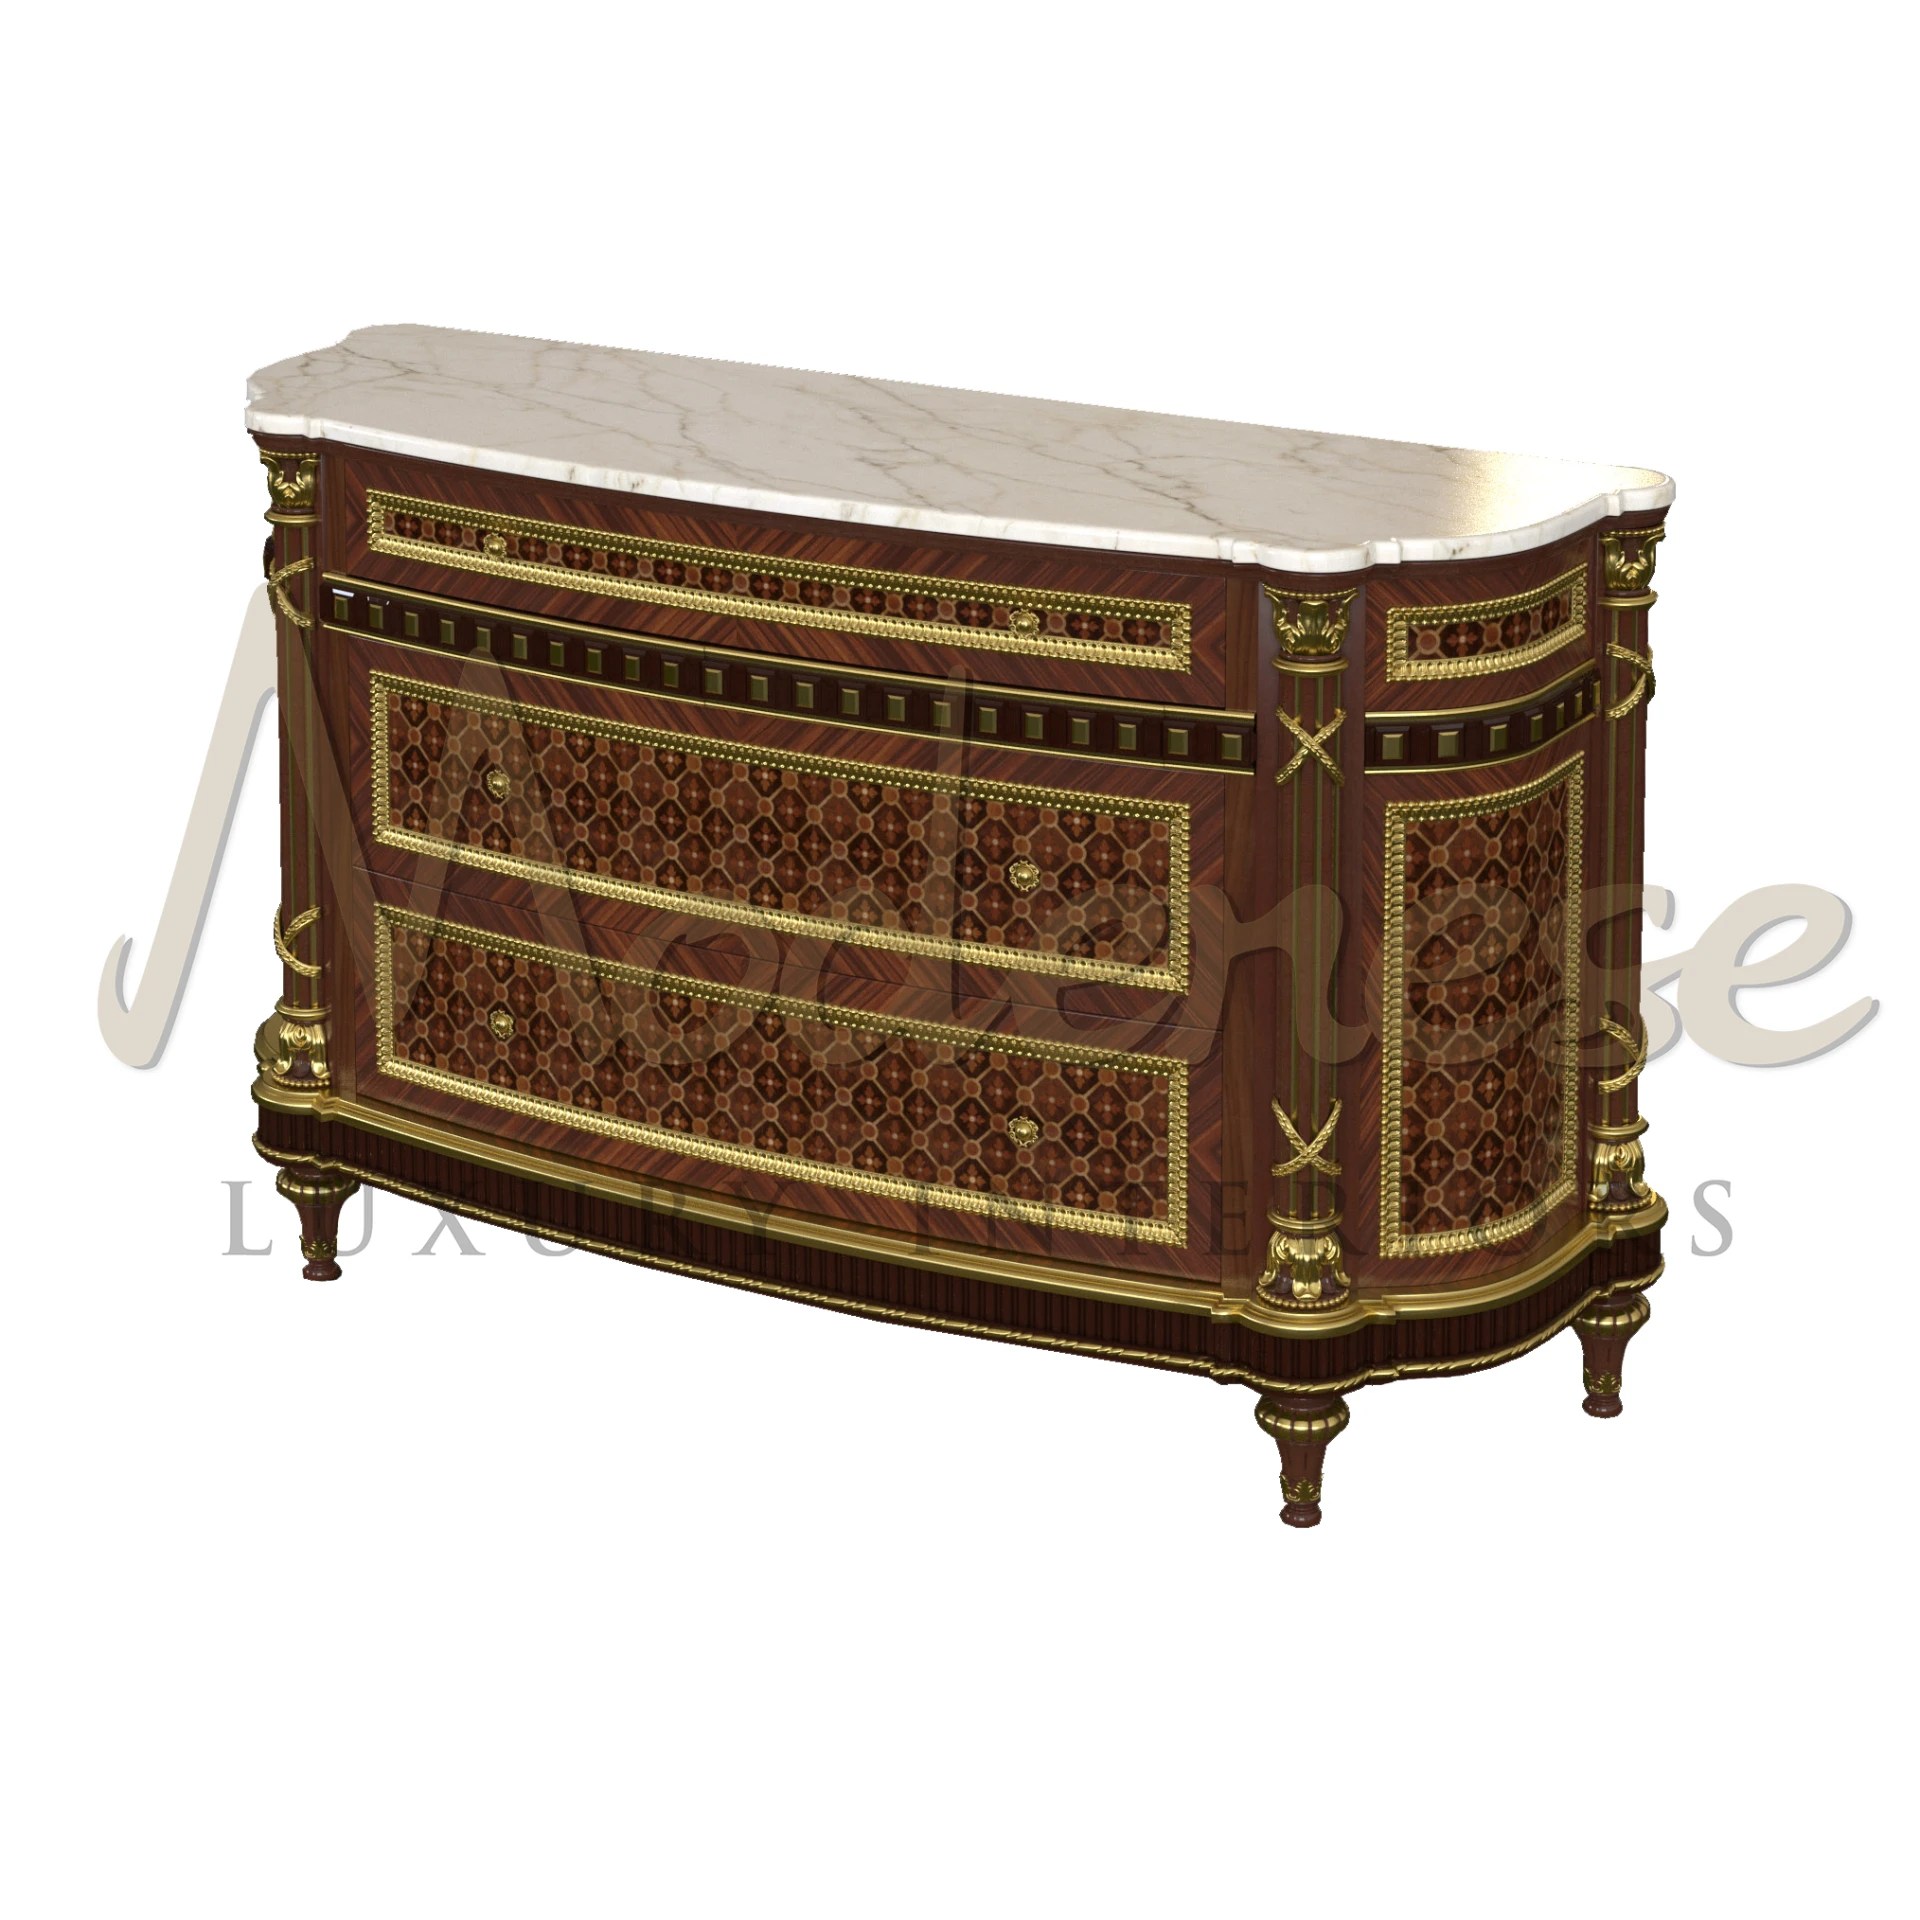 Elegant French marquetry chest of drawers exuding timeless charm, crafted with intricate wood inlay designs. A fusion of sophistication and functionality for any interior.